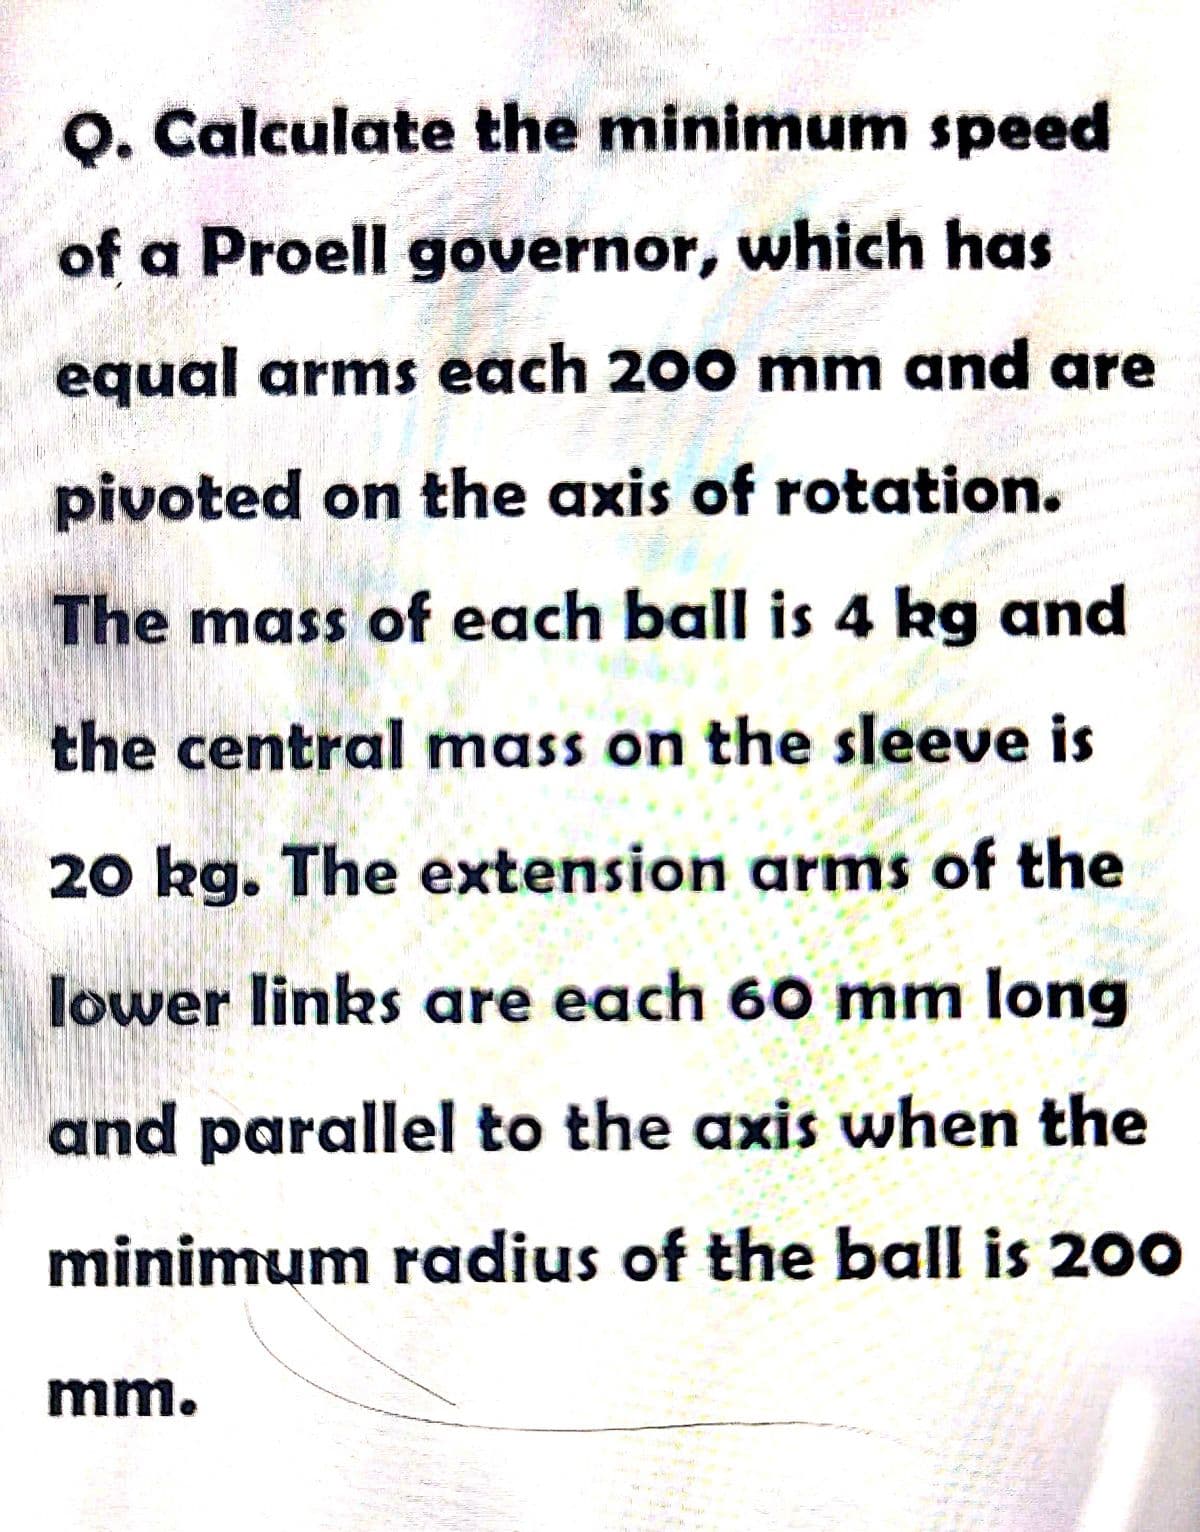 O. Calculate the minimum speed
of a Proell governor, which has
equal arms each 200 mm and are
pivoted on the axis of rotation.
The mass of each ball is 4 kg and
the central mass on the sleeve is
20 kg. The extension arms of the
lower links are each 60 mm long
and parallel to the axis when the
minimum radius of the ball is 200
mm.
